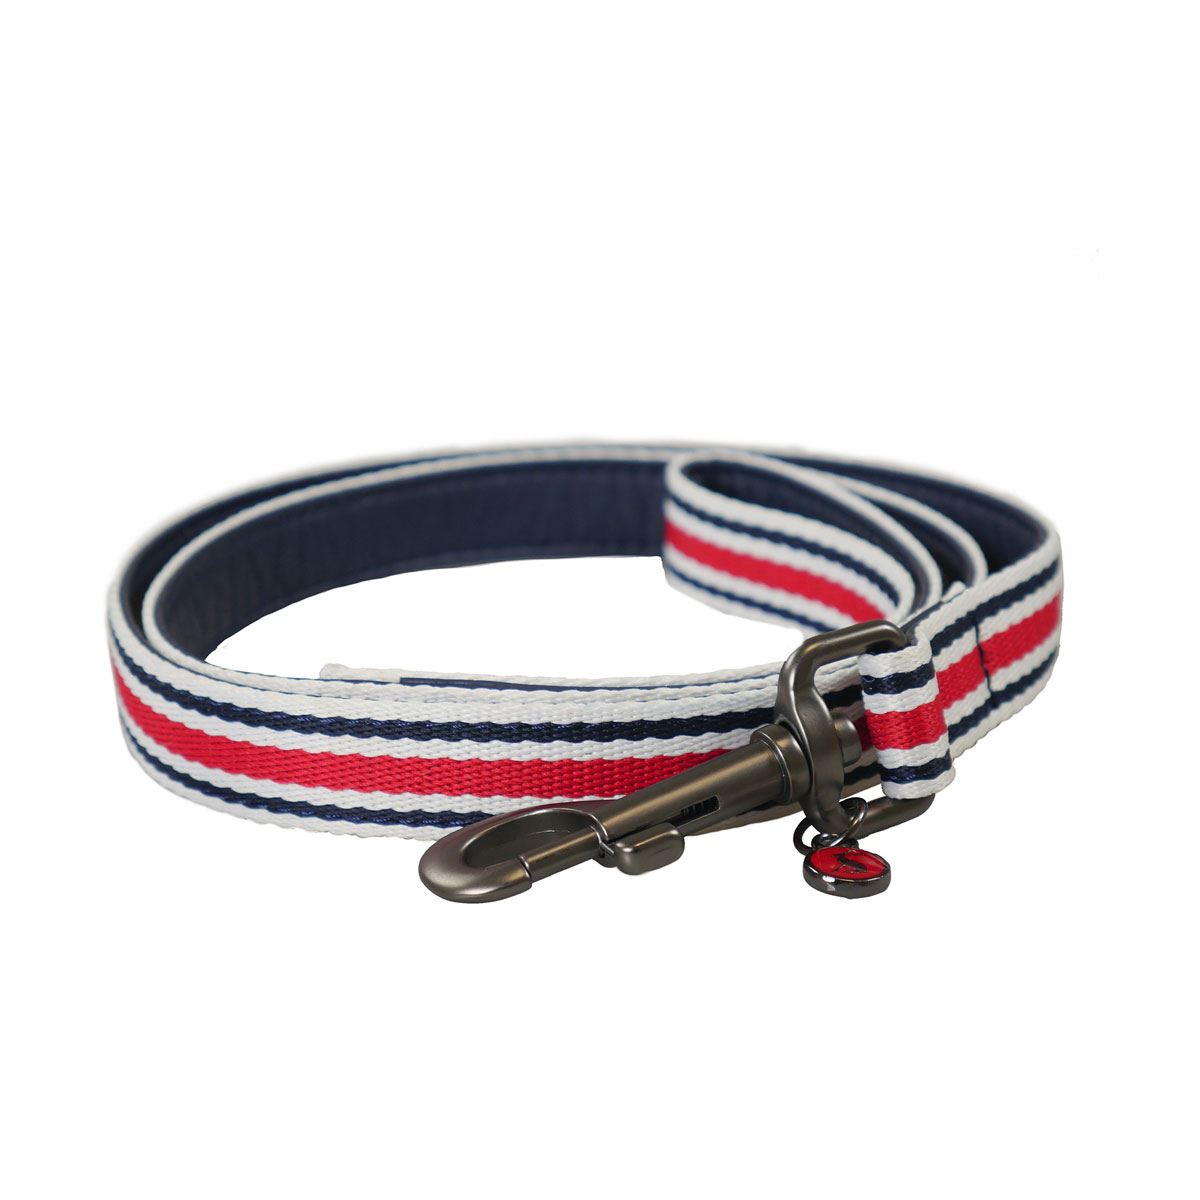 Joules Striped Dog Lead - Just Horse Riders